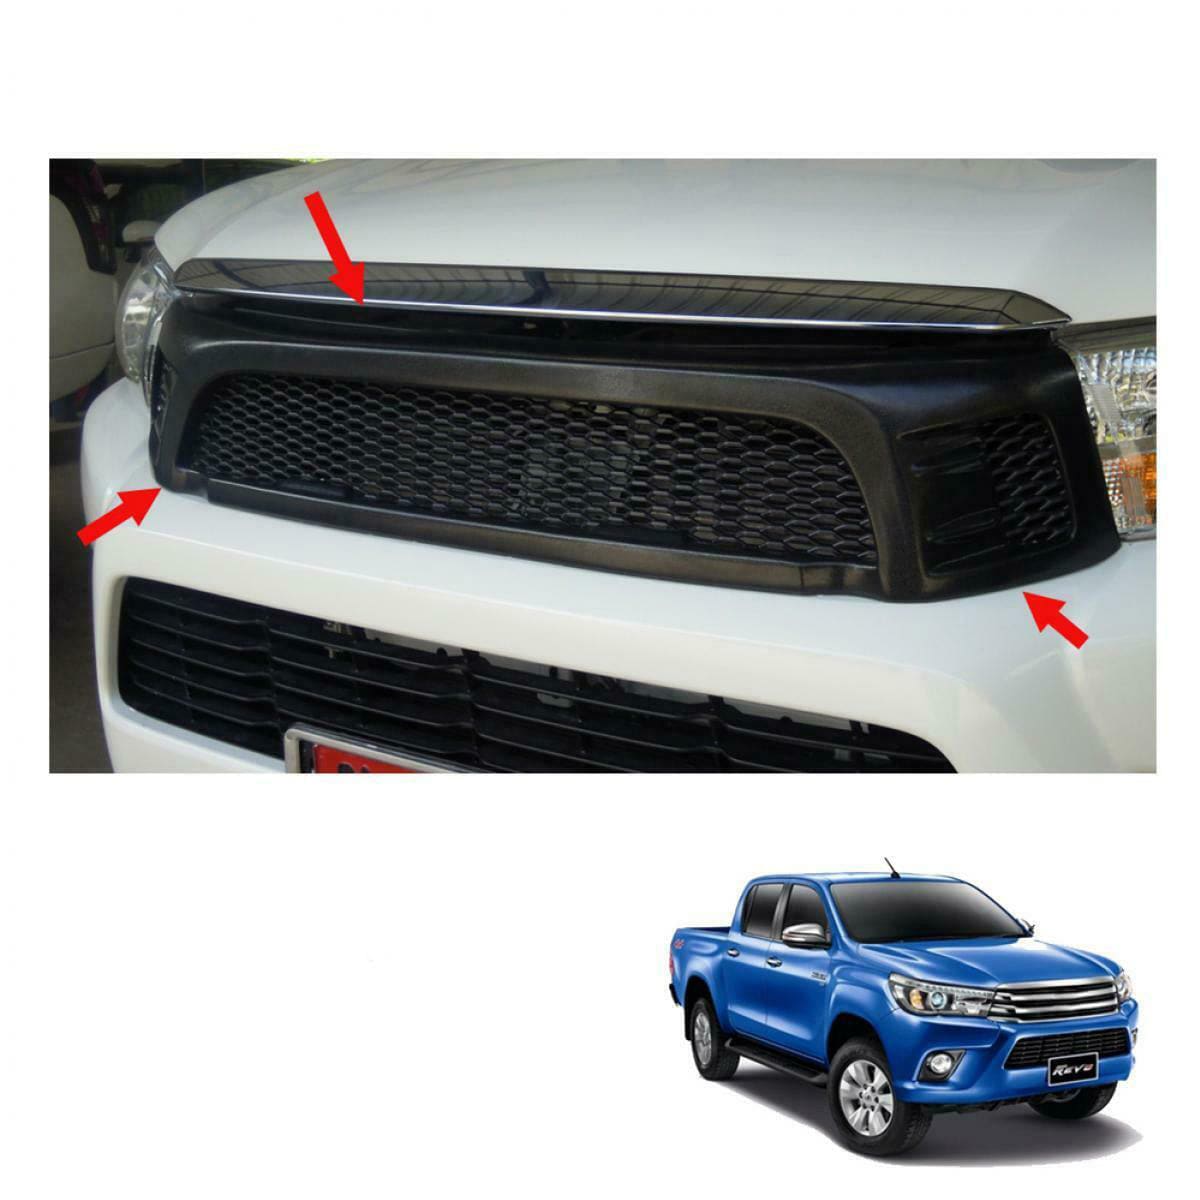 Black Grills Suitable for Toyota Hilux 2015-2019 (Online Only) - OZI4X4 PTY LTD